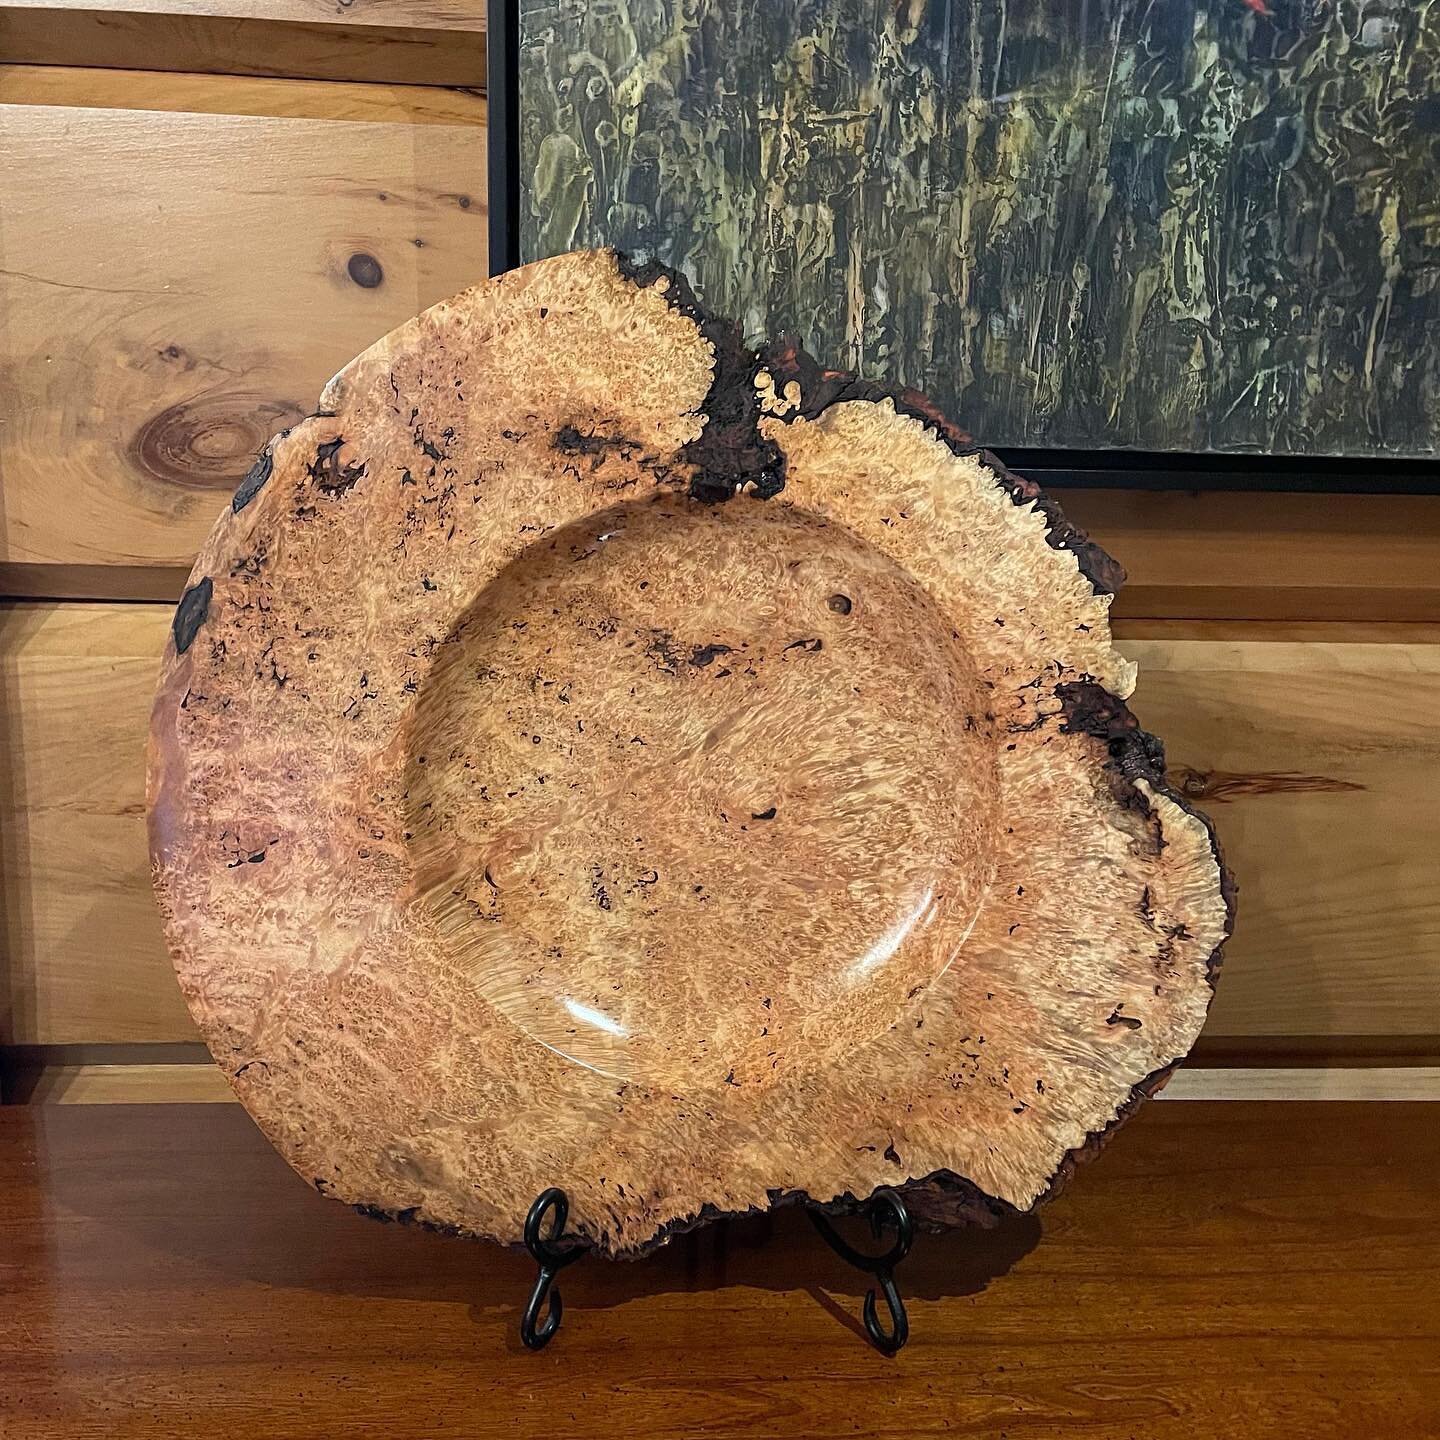 We appreciate nature&rsquo;s beauty that is imperfect, flawed and incomplete. Burl art allows us to enjoy the simplicity and elegance of a hand turned platter. 

Big Leaf Maple Burl Platter 18&rdquo; round x 2.25&rdquo; high

#burlart #bigleafmaplebu